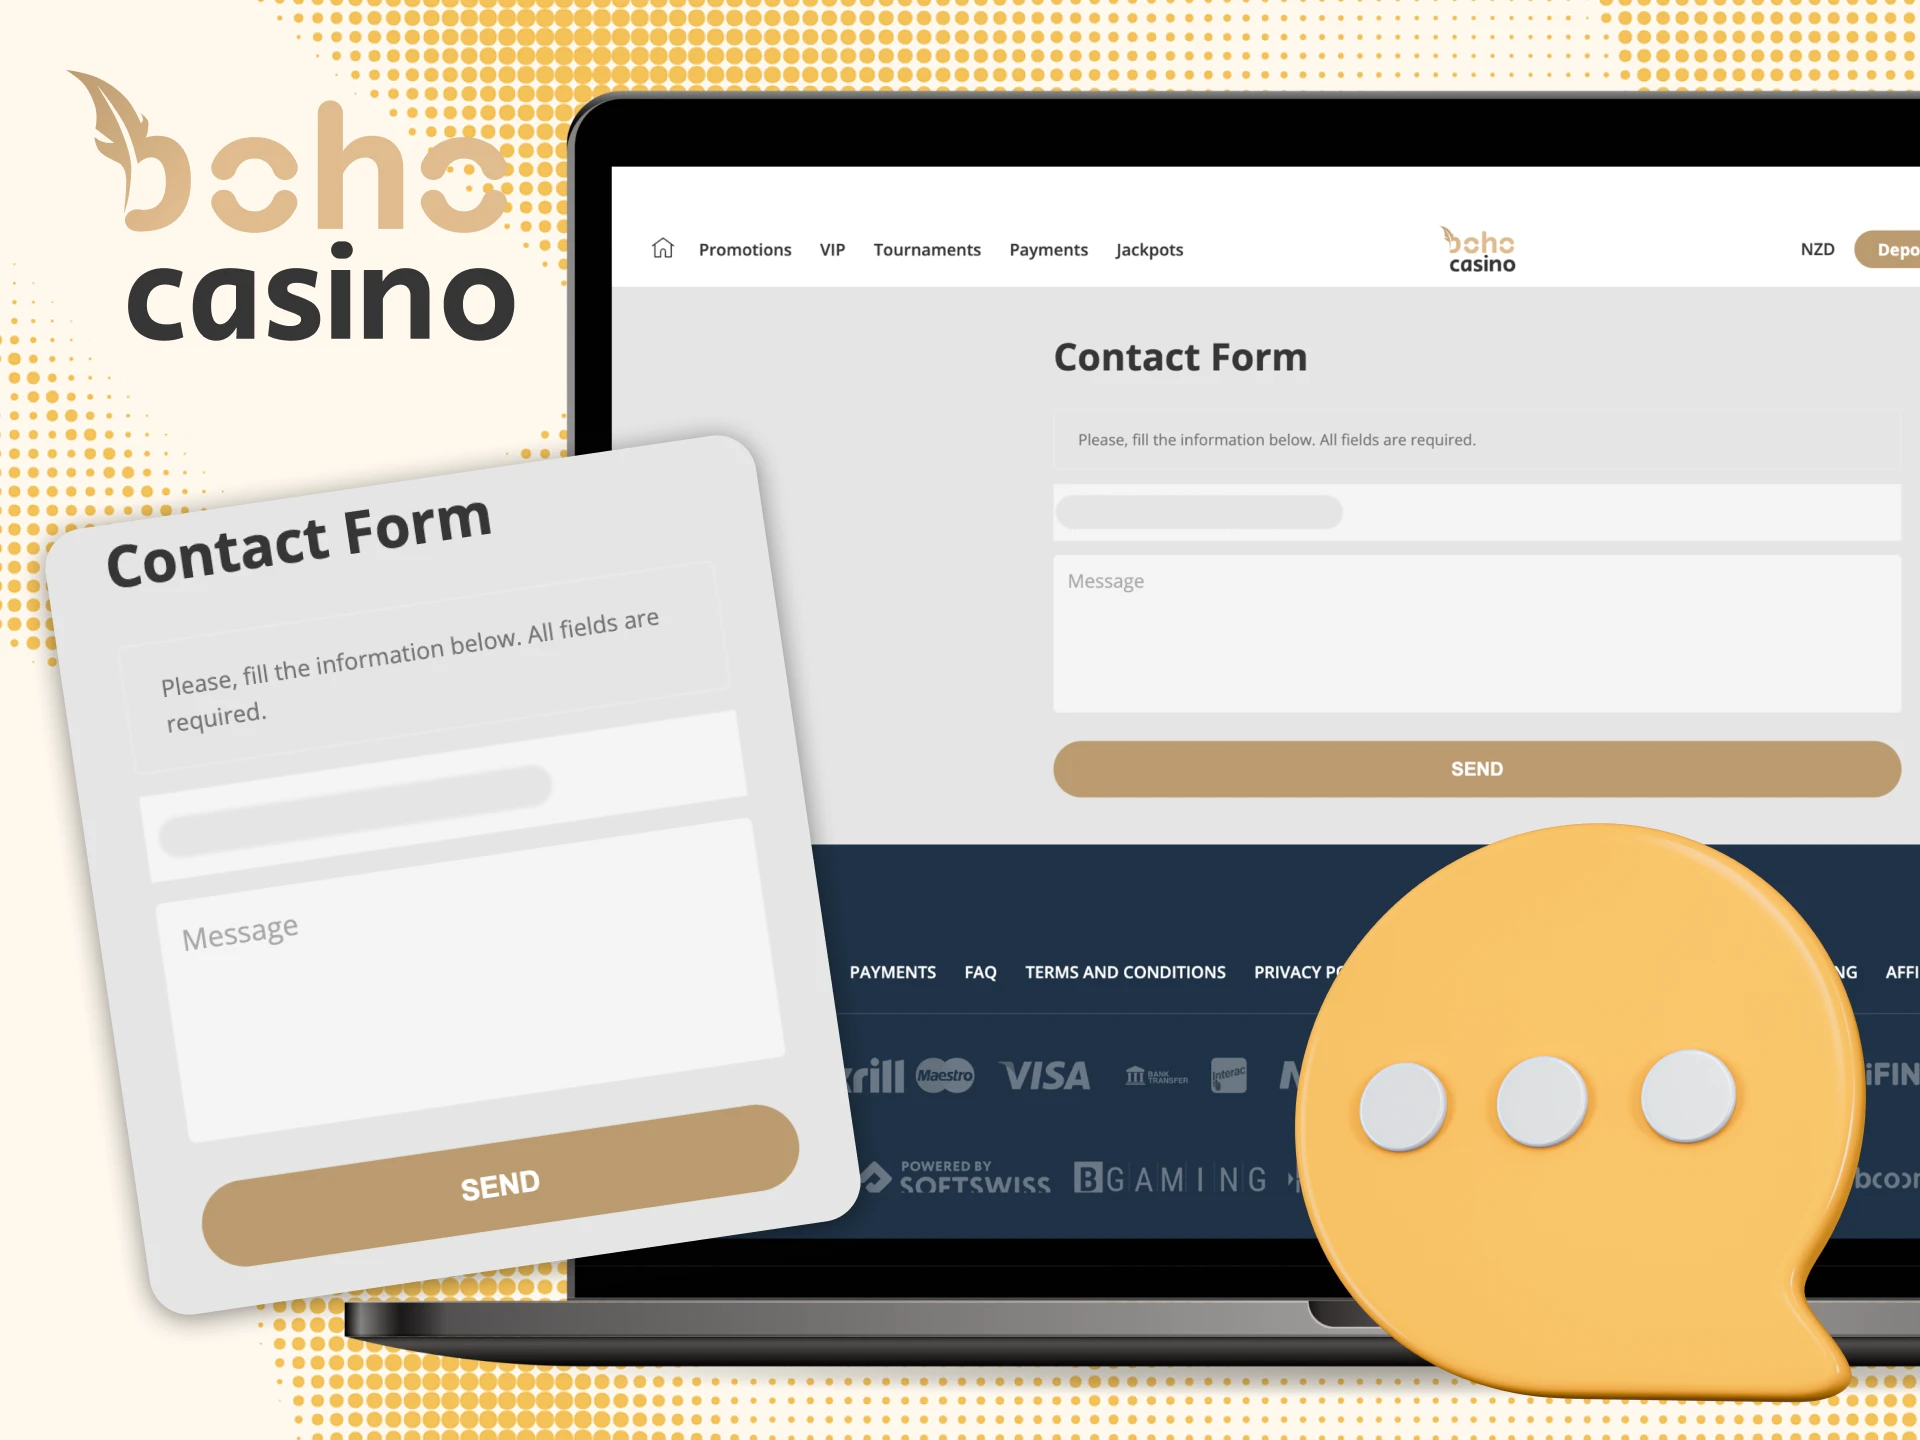 Is there a contacts form on the Boho online casino website.